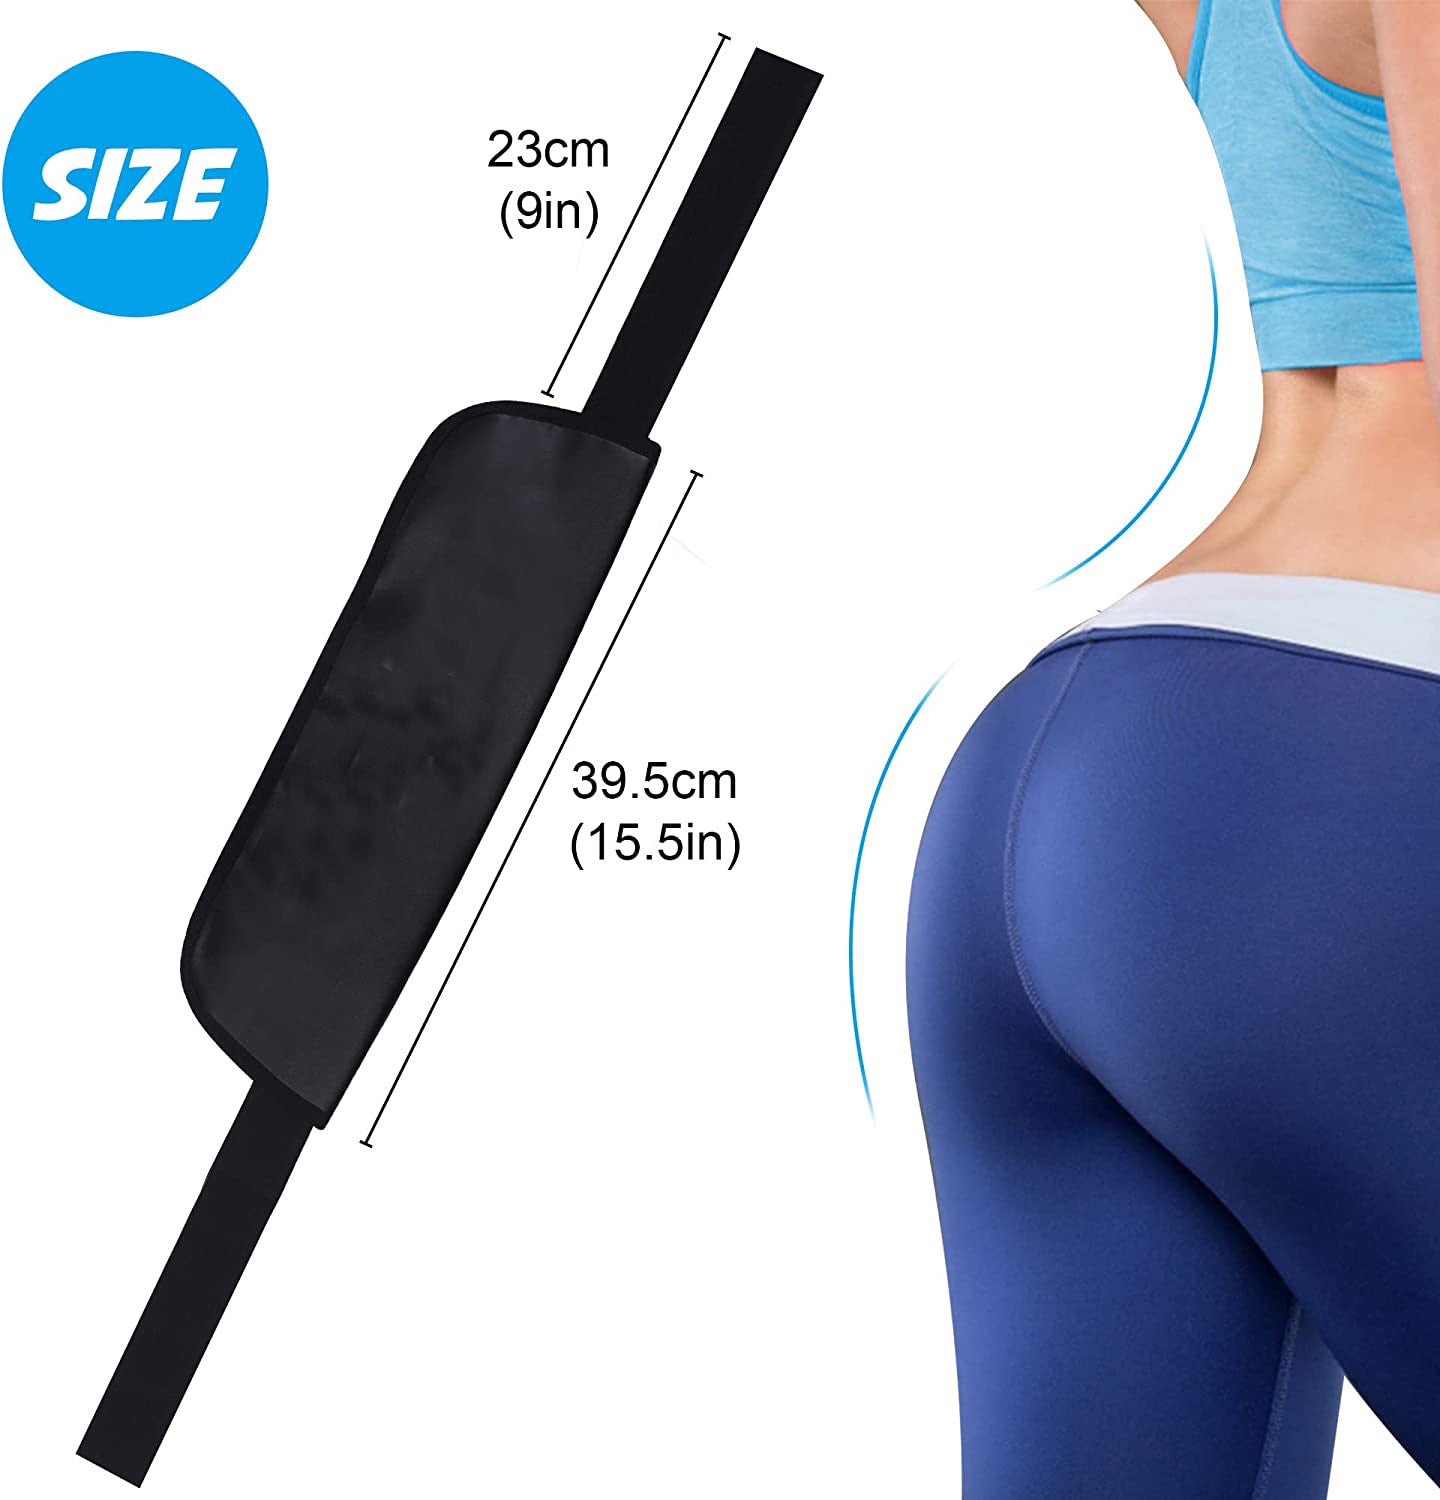 Glute Gainz - Hip Thrust Belt & Pad for Injoyable Workouts